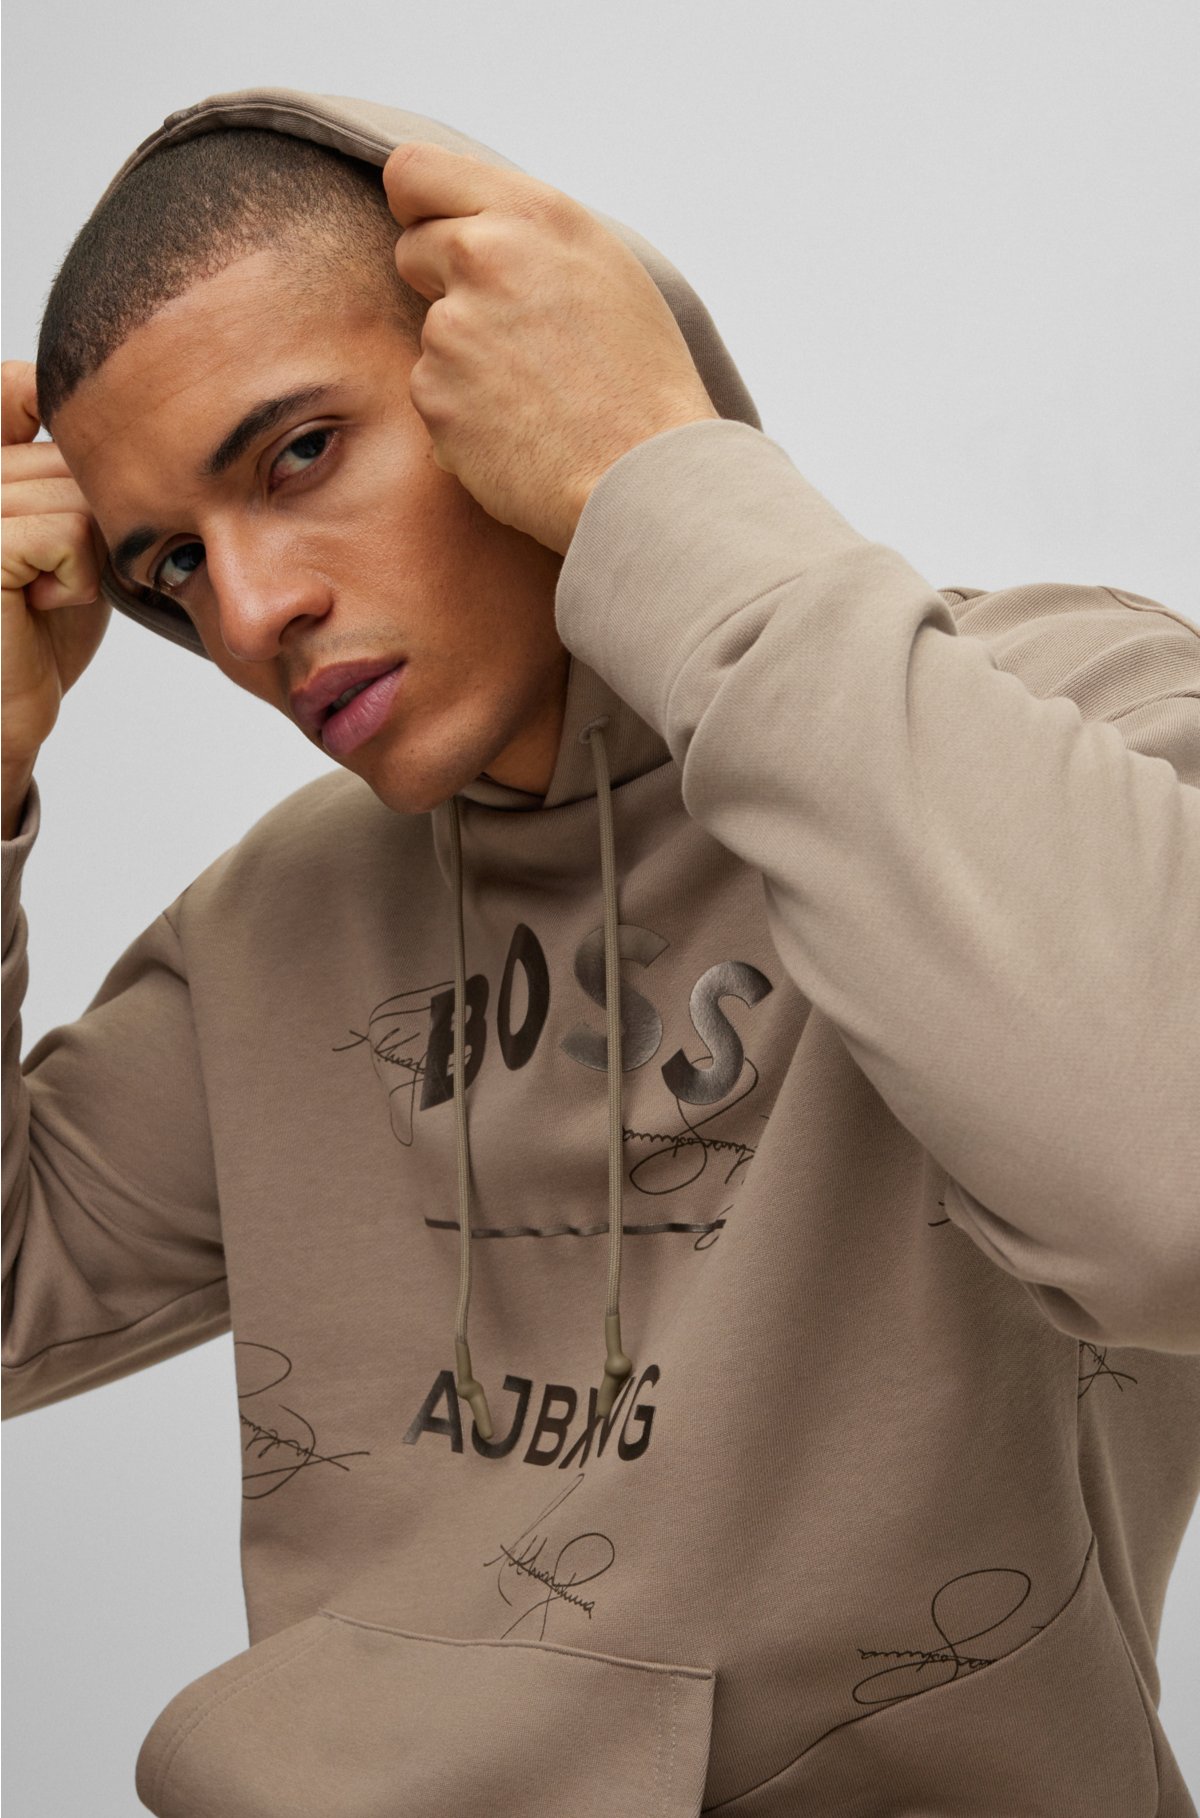 BOSS - BOSS x AJBXNG collaborative cotton relaxed-fit hoodie branding with